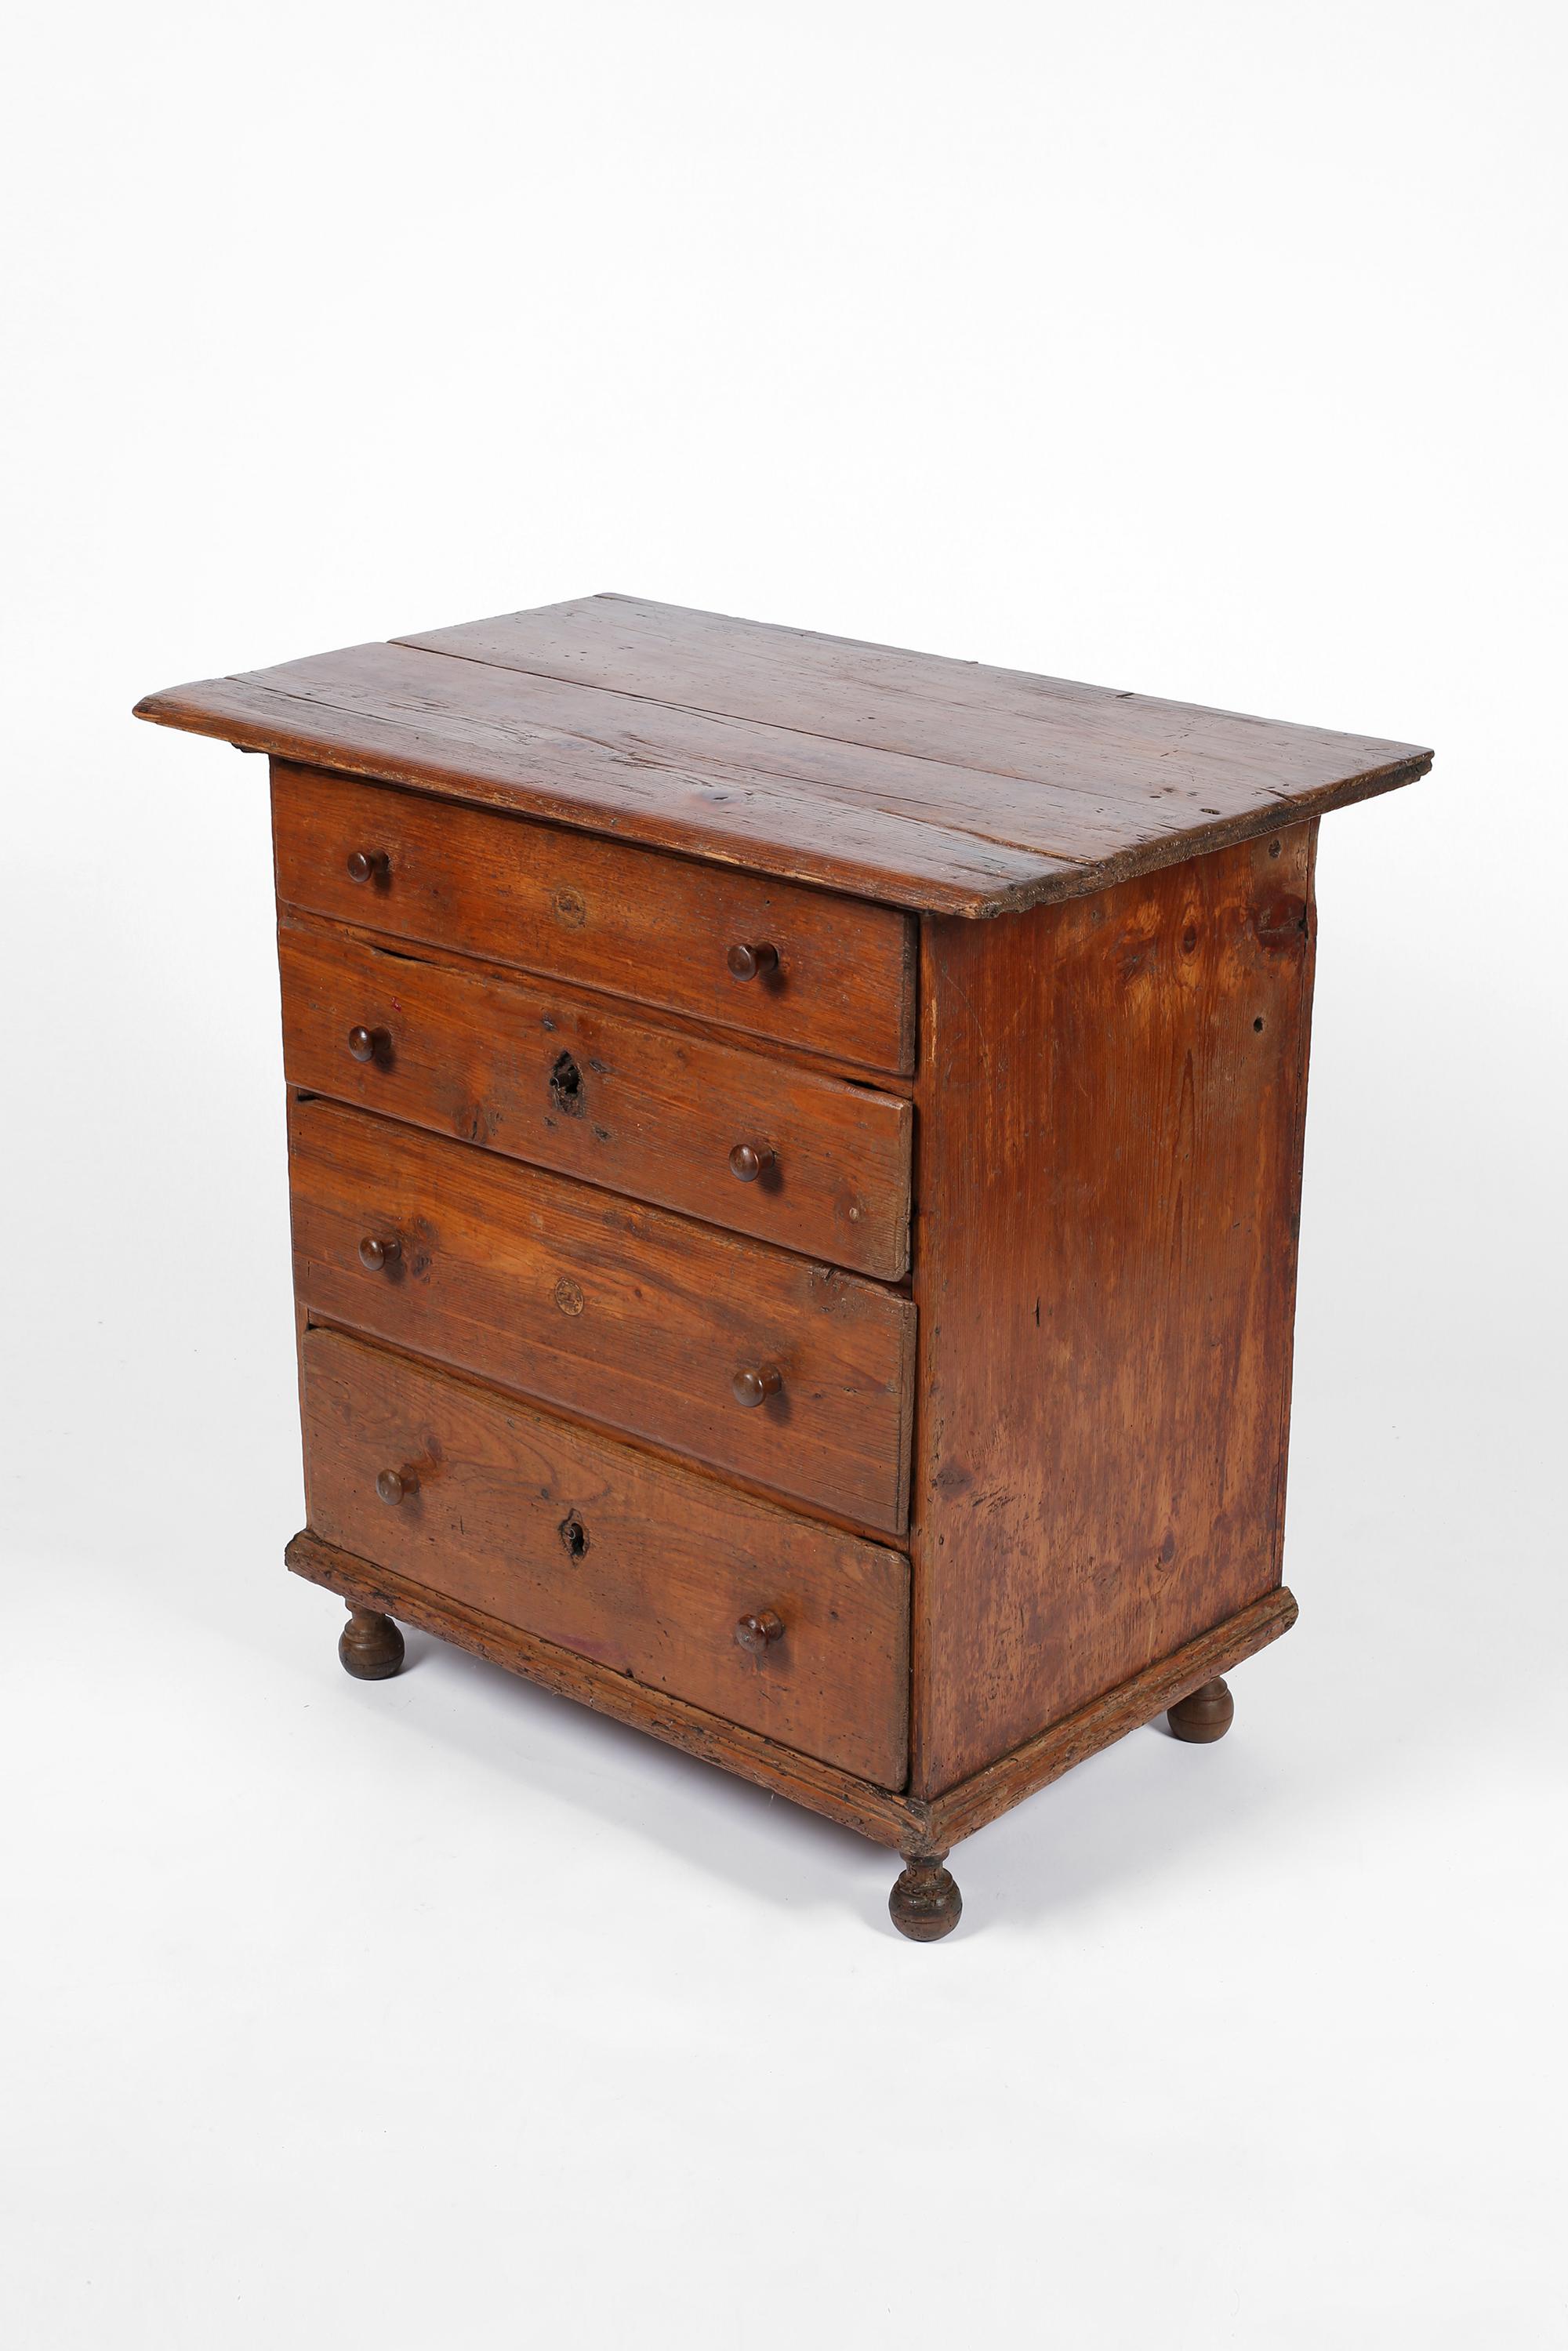 Early 18th Century Italian Chest of Draws in Pine and Elm - Veneto, circa 1700 For Sale 4